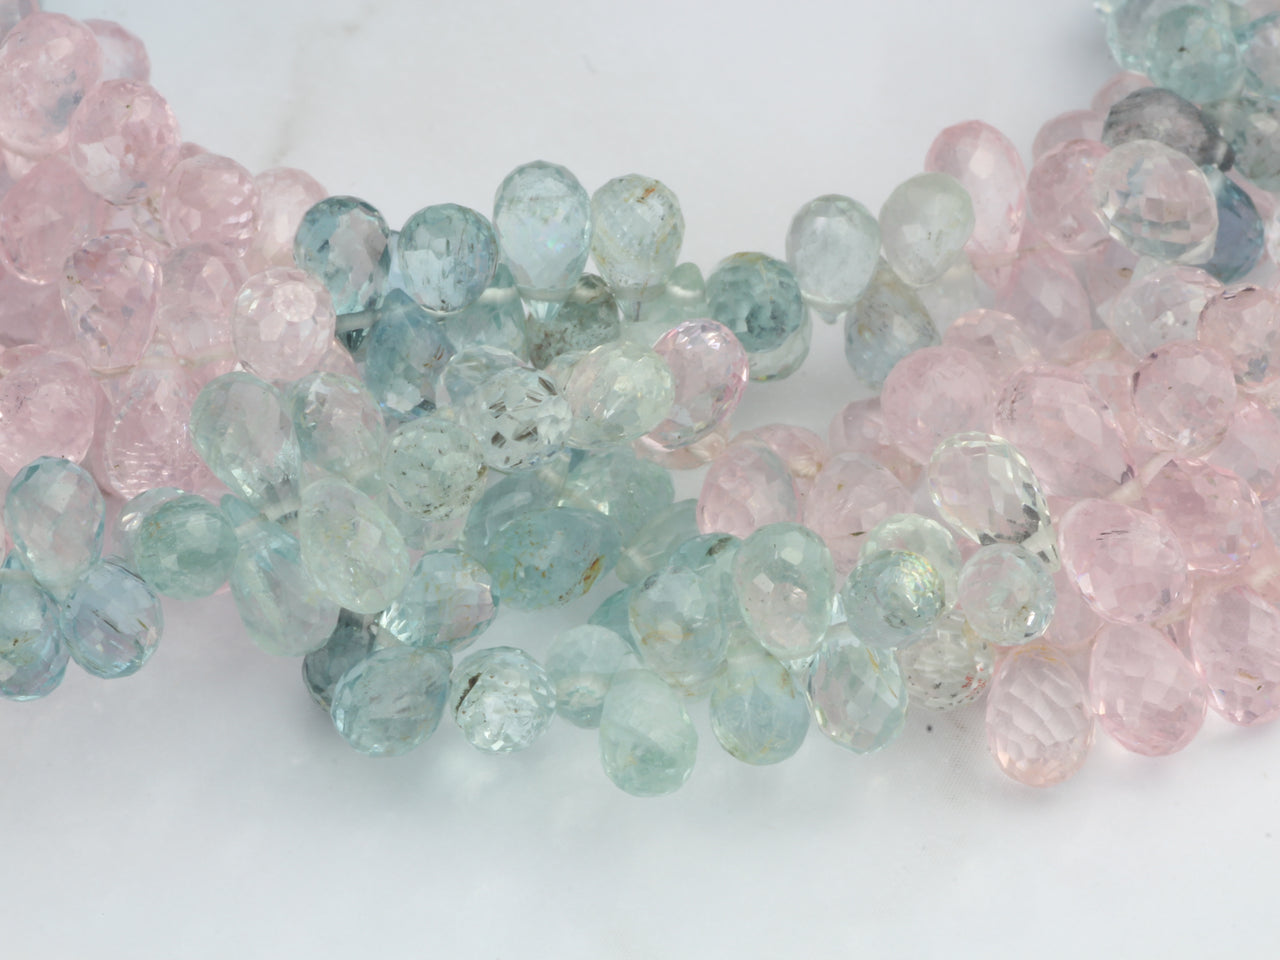 Ombre Aquamarine and Morganite 6x4mm Faceted Teardrop Briolettes Bead Strand